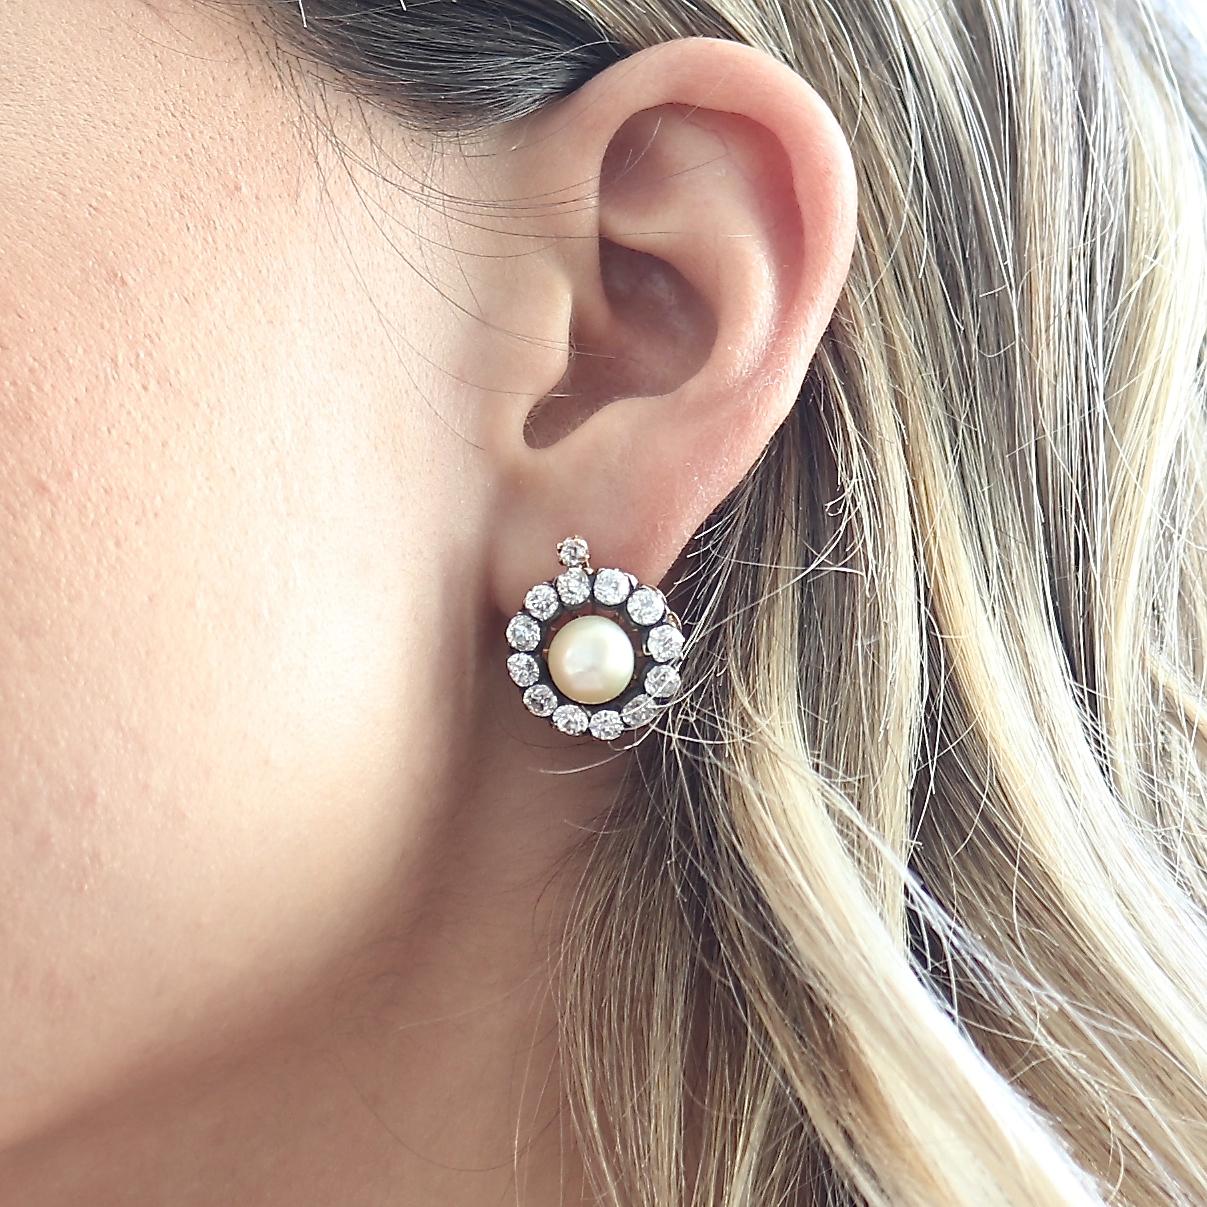 The everlasting bloom of nature captured with these natural pearl earrings. Featuring GIA certified natural salt water pearls that are surrounded by halos of old cut diamonds. Hand crafted in 18k gold resting on floating backs. Accompanied with the